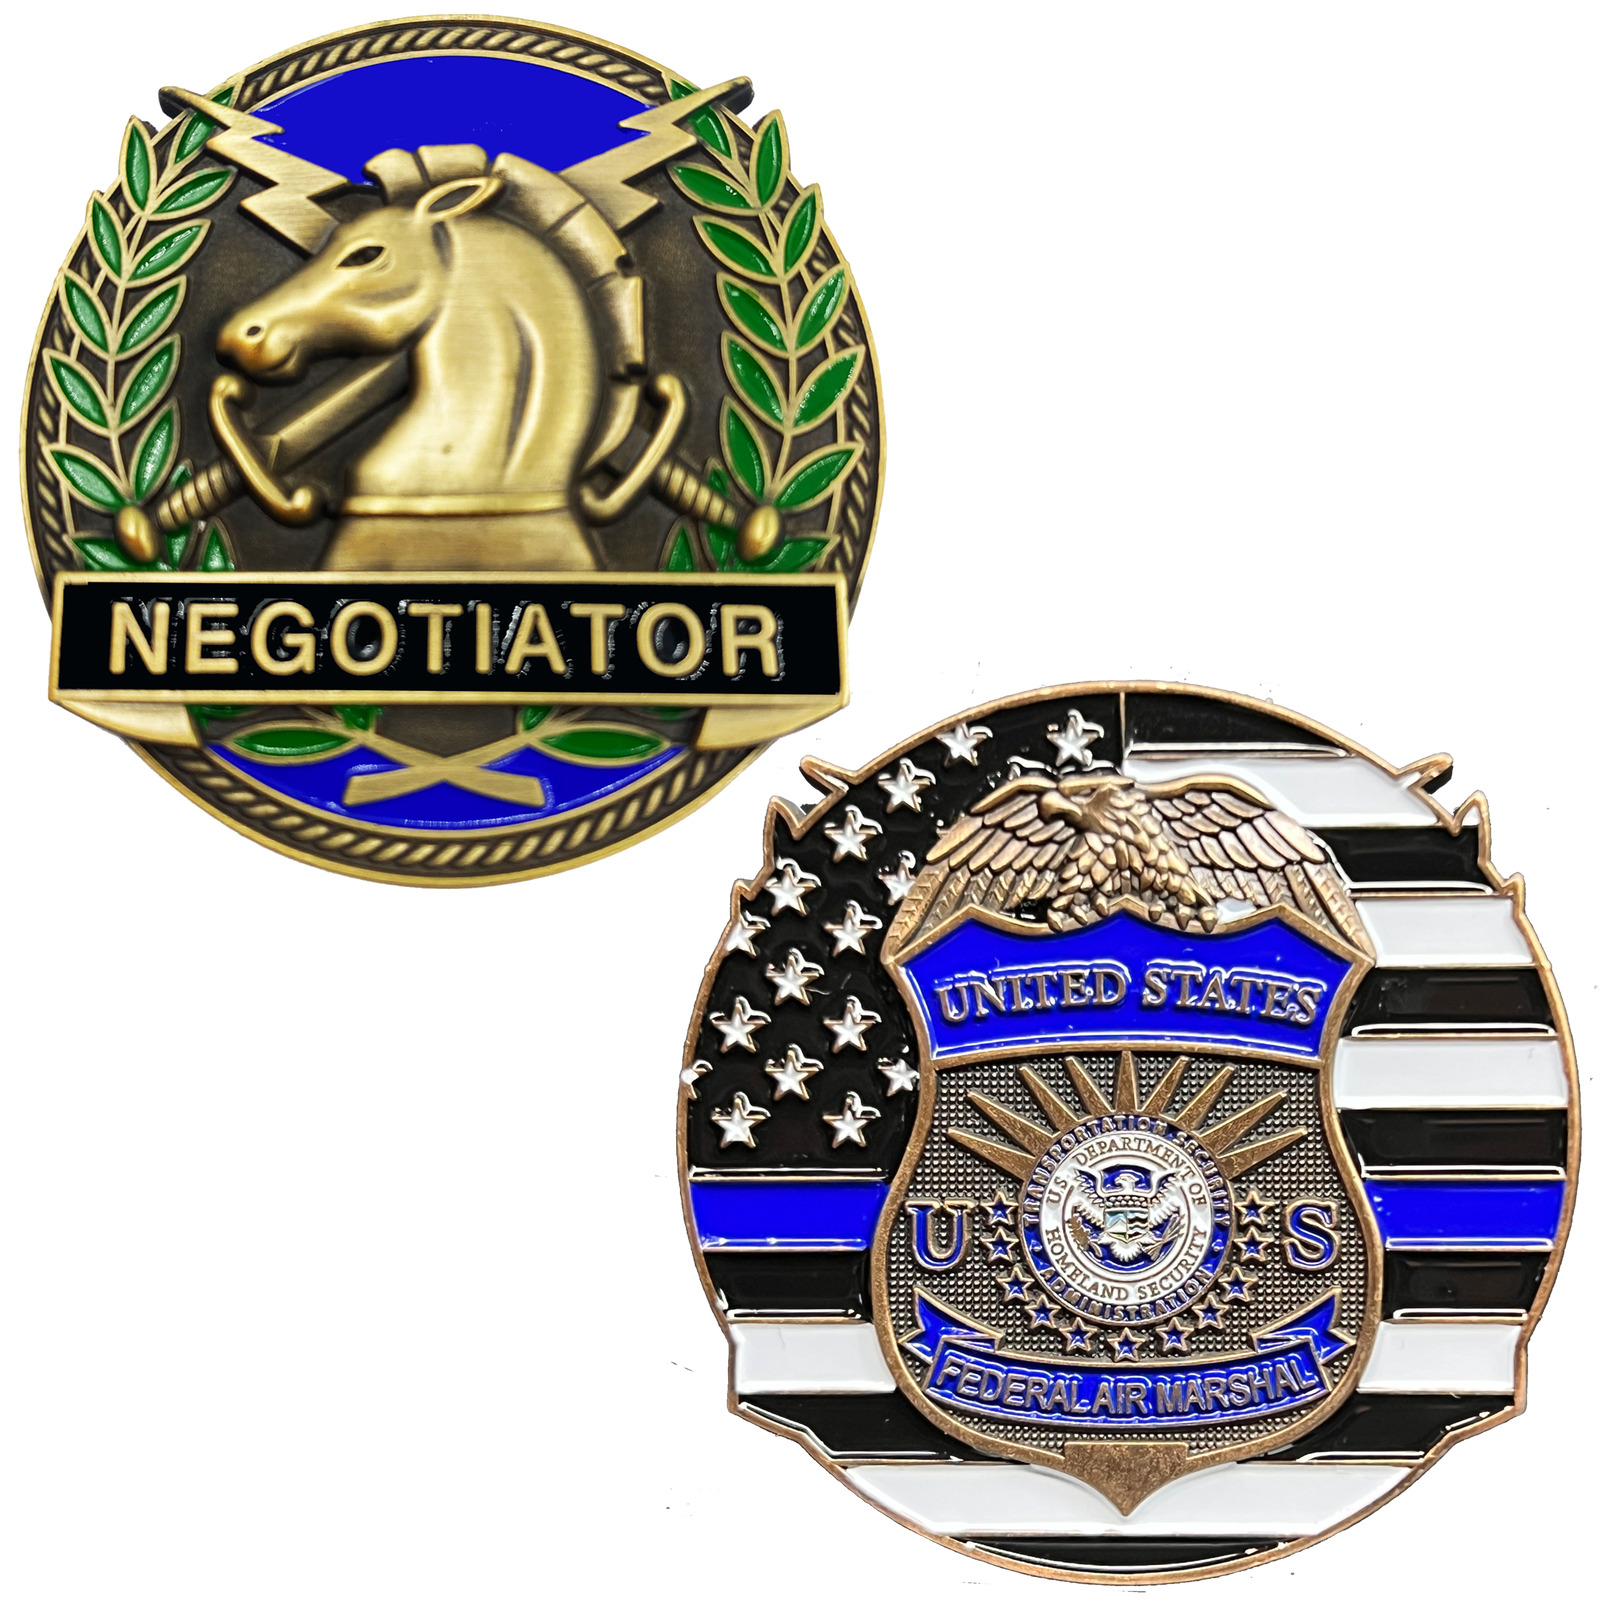 GL13-004 FAM Federal Air Marshal Thin Blue Line Negotiator Challenge Coin